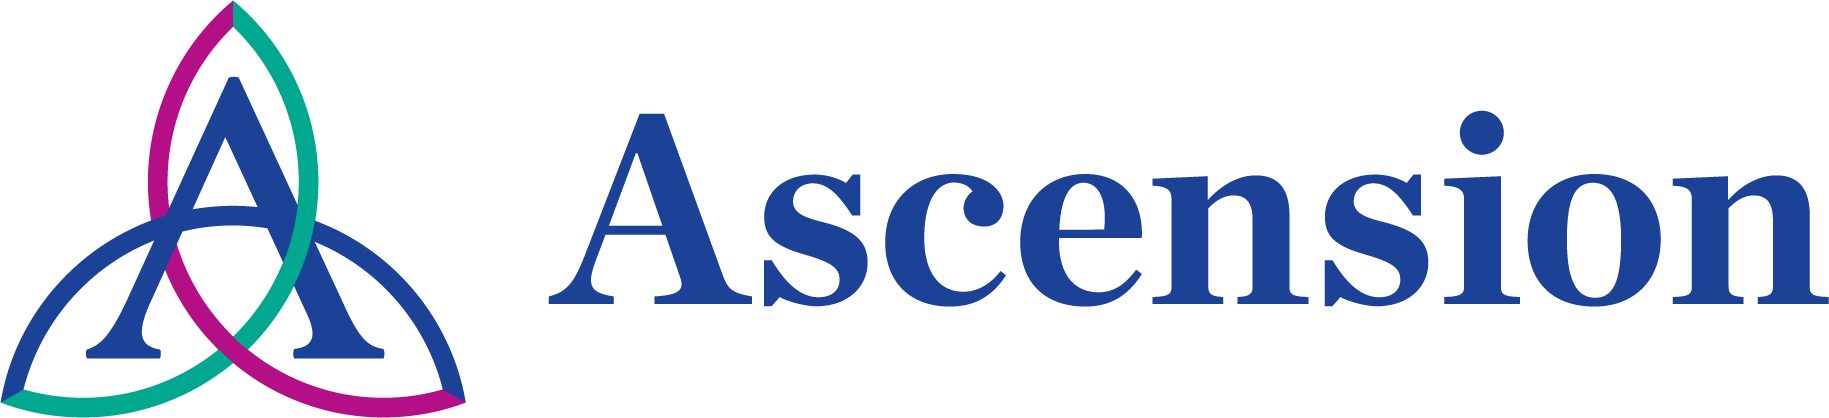 Ascension Wisconsin Logo